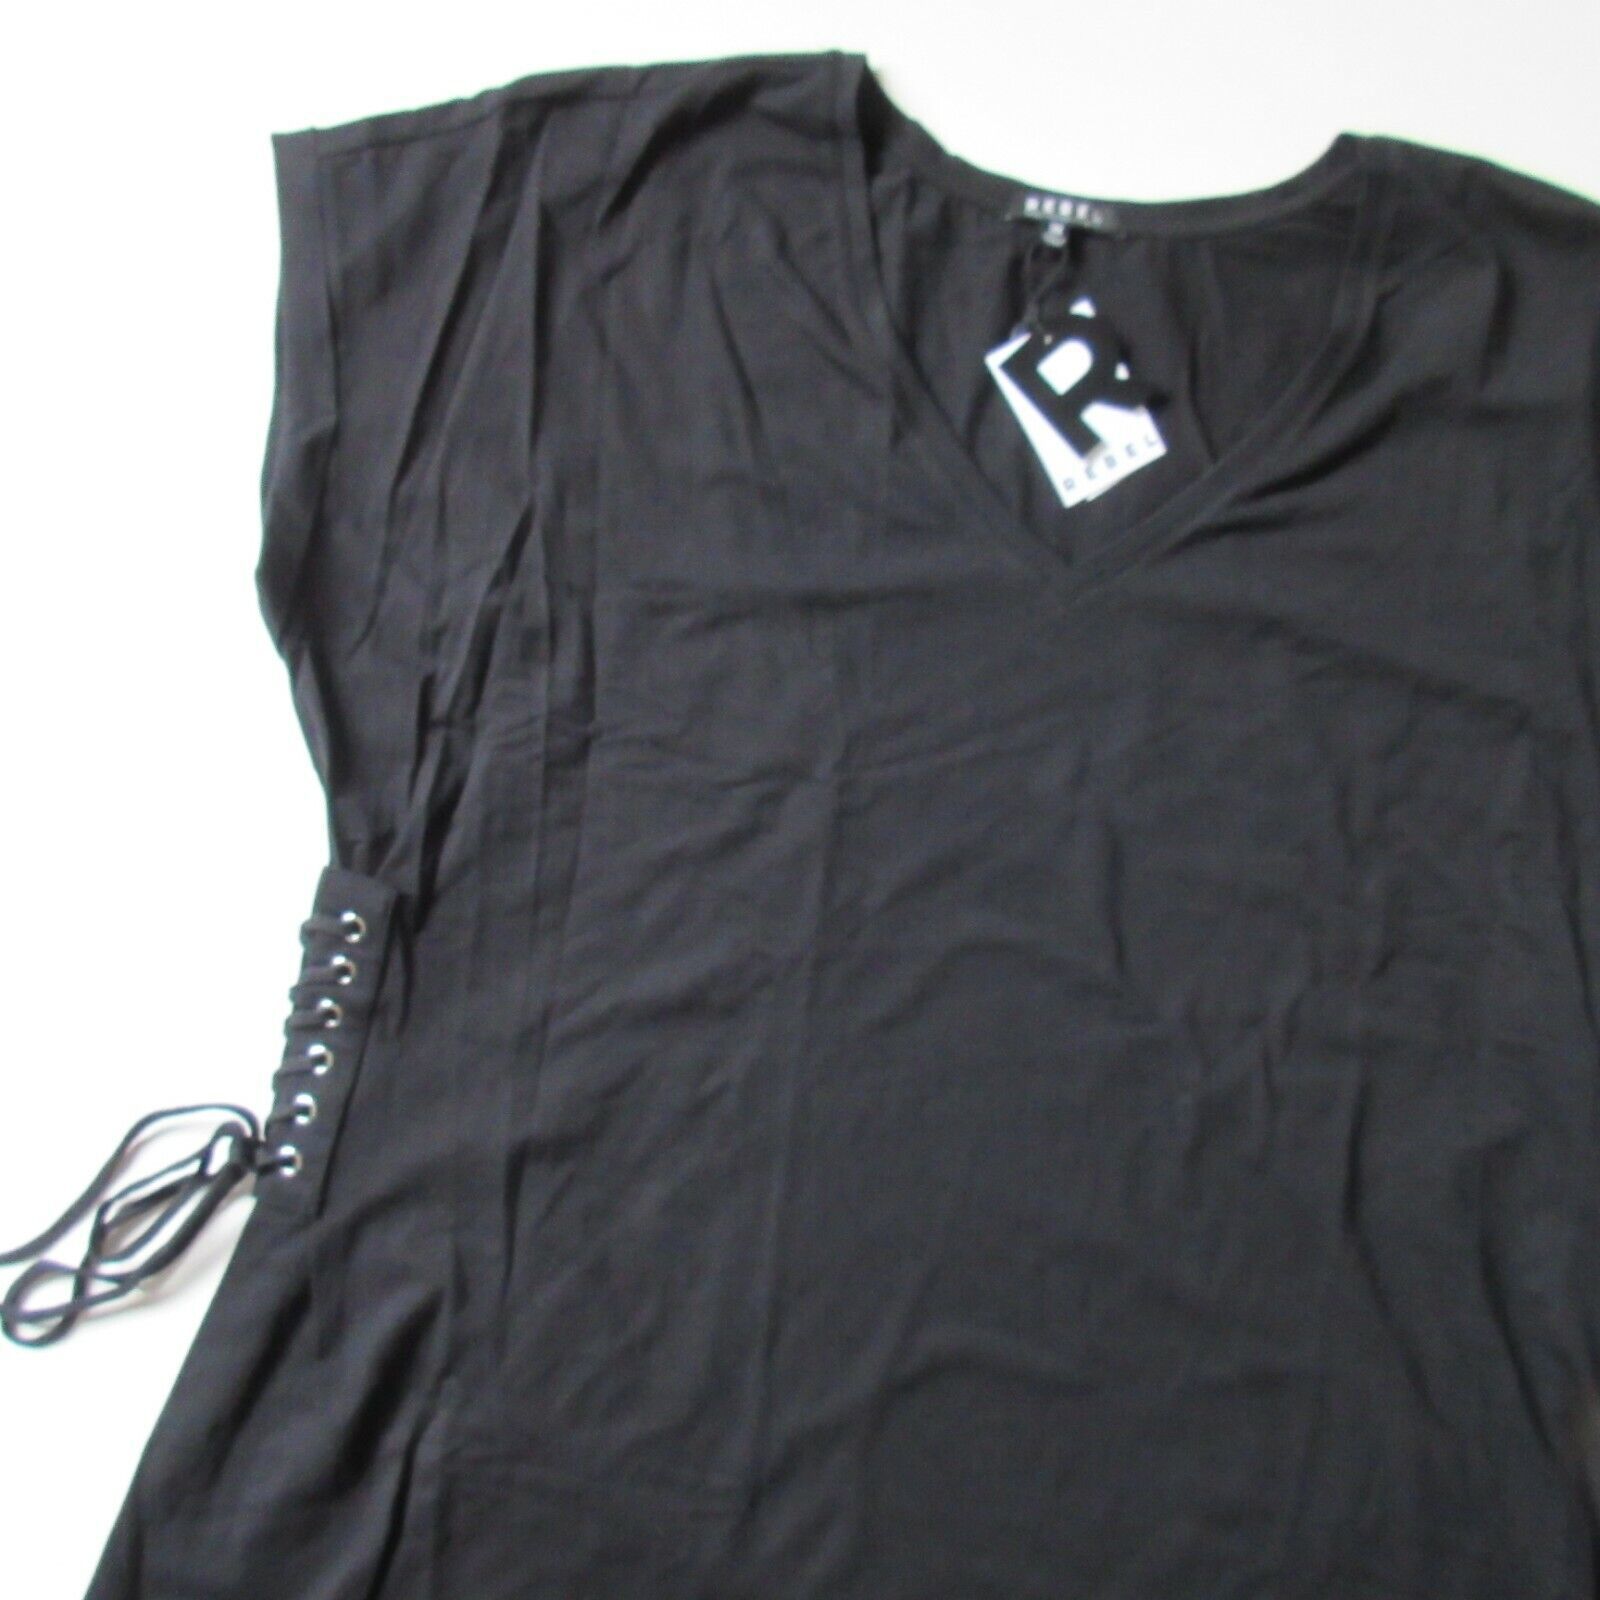 Primary image for NWT Rebel Wilson x Angels Corset Side Shift in Black V-neck T-Shirt Dress 3X $89